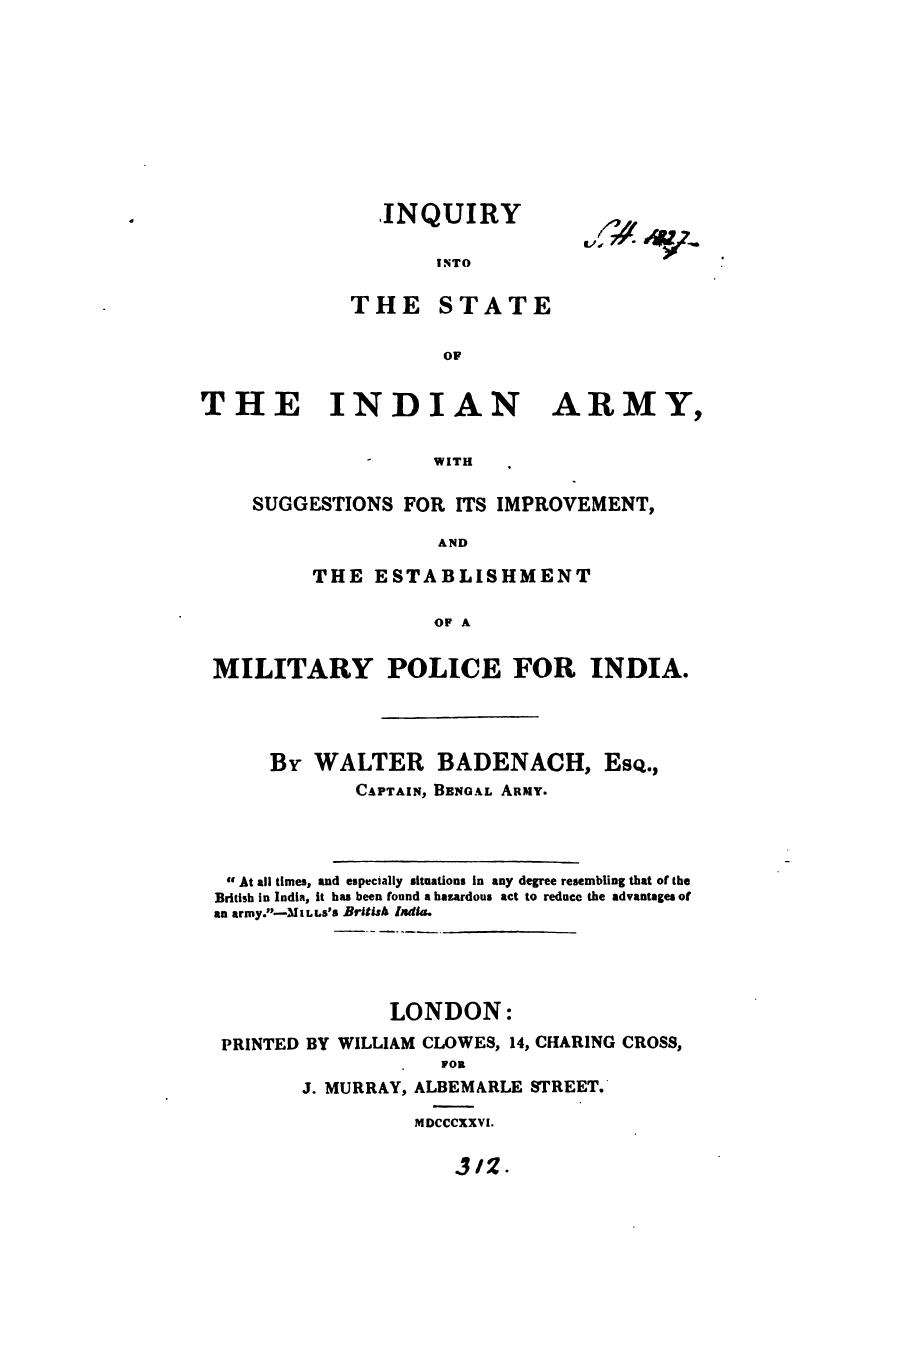 Inquiry into the State of Indian Army, with suggestions for its improvement and the establishment of a military police for India by Walter Badenach